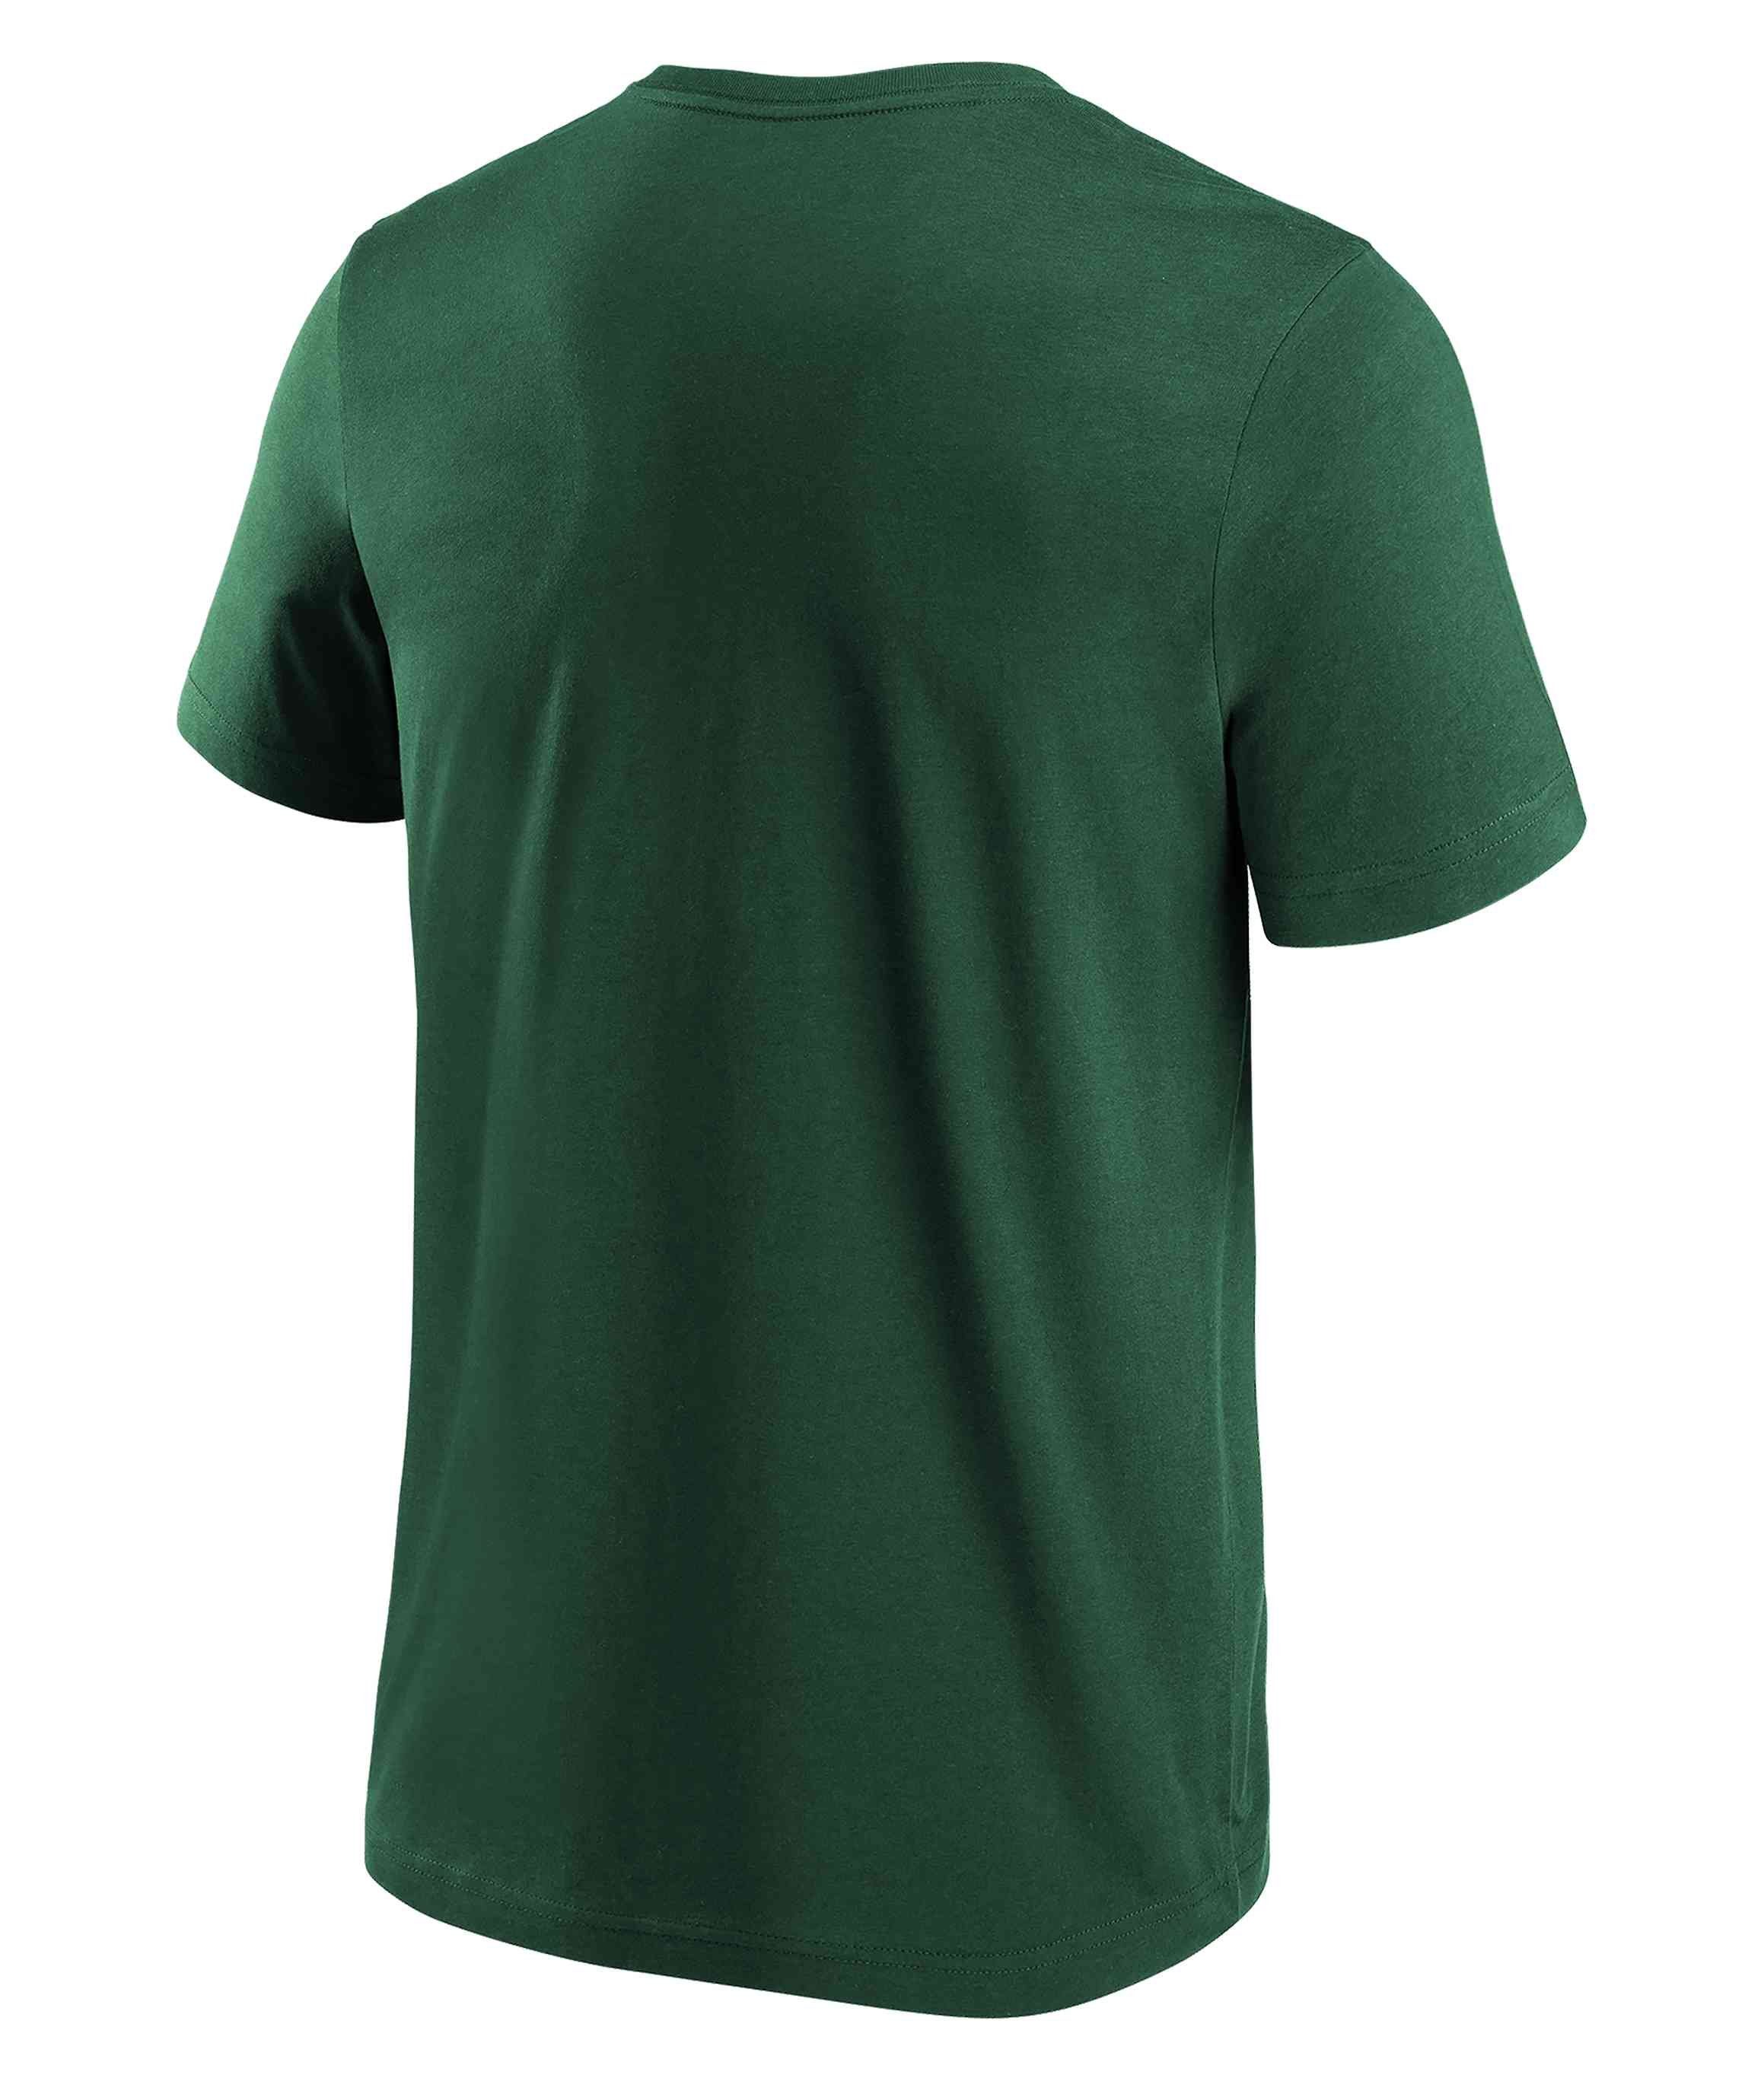 Green T-Shirt Packers NFL Fanatics Graphic Primary Logo Bay